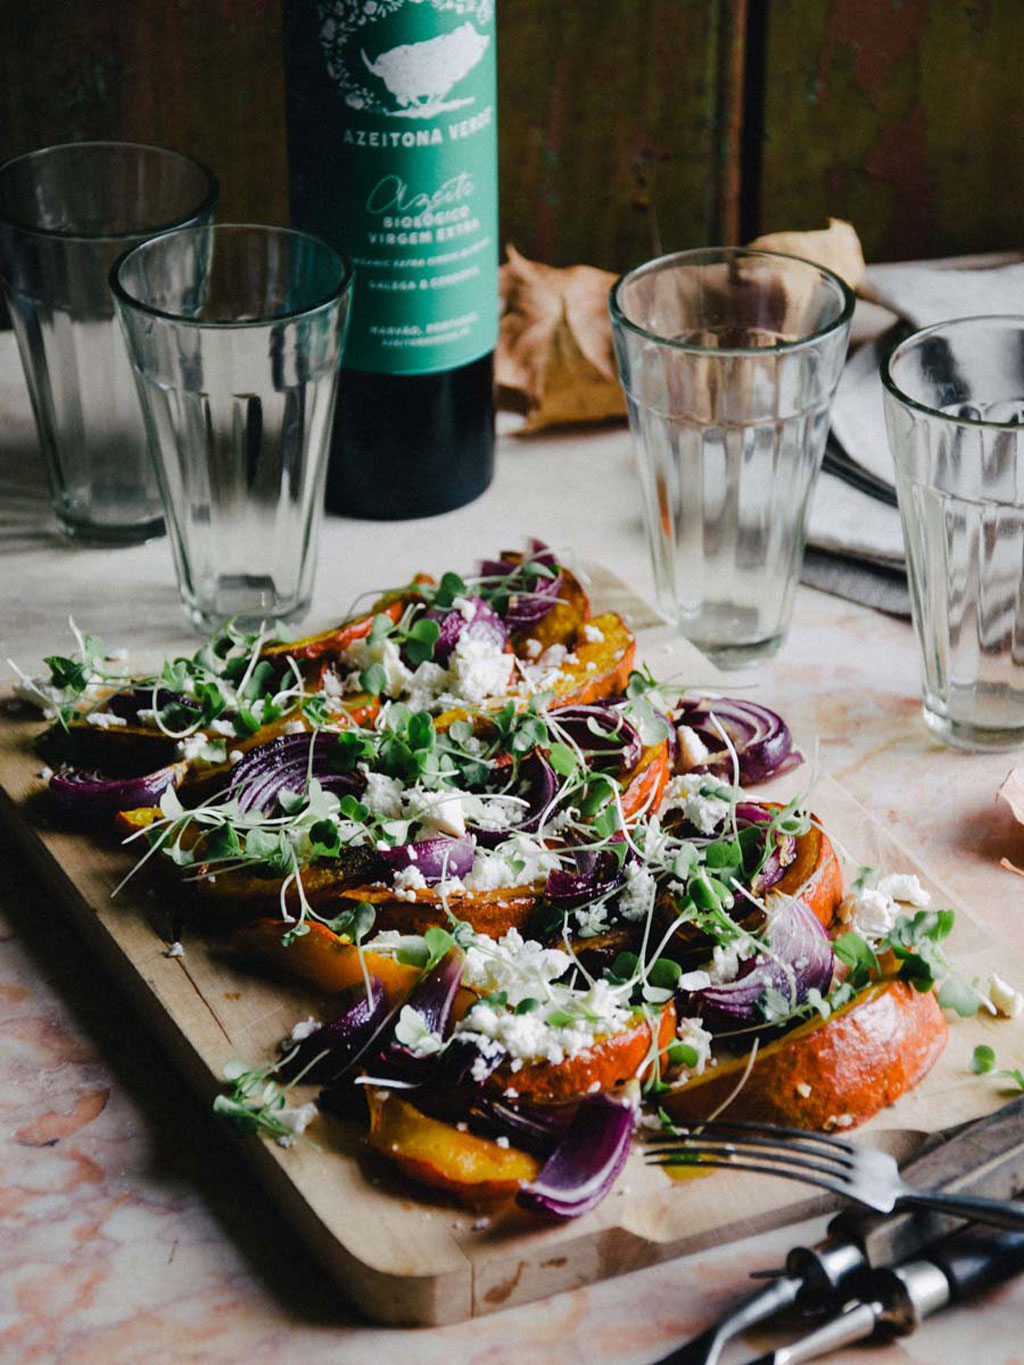 Baked pumpkin with feta cheese, red onion, and microgreens